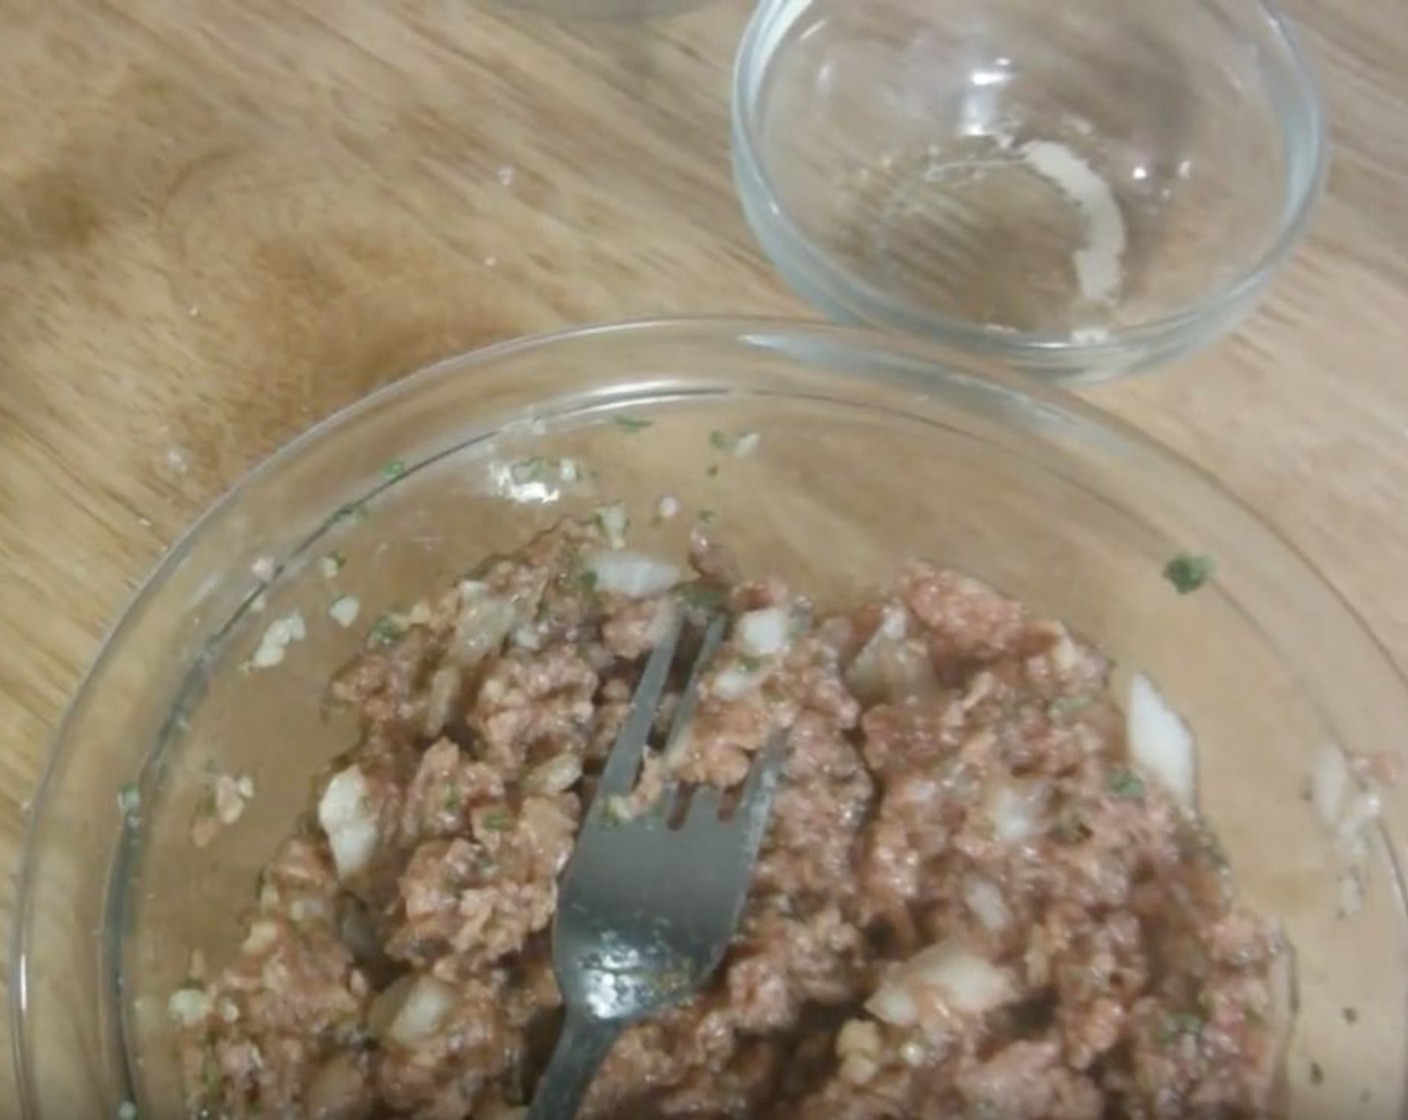 step 4 Add Soy Sauce (1 tsp), Onion (1), Dried Chives (1/2 Tbsp), Dried Parsley (1/2 tsp), Ground Black Pepper (1 tsp), Granulated Sugar (2 1/2 Tbsp), and Garlic (1 Tbsp). Mix well.